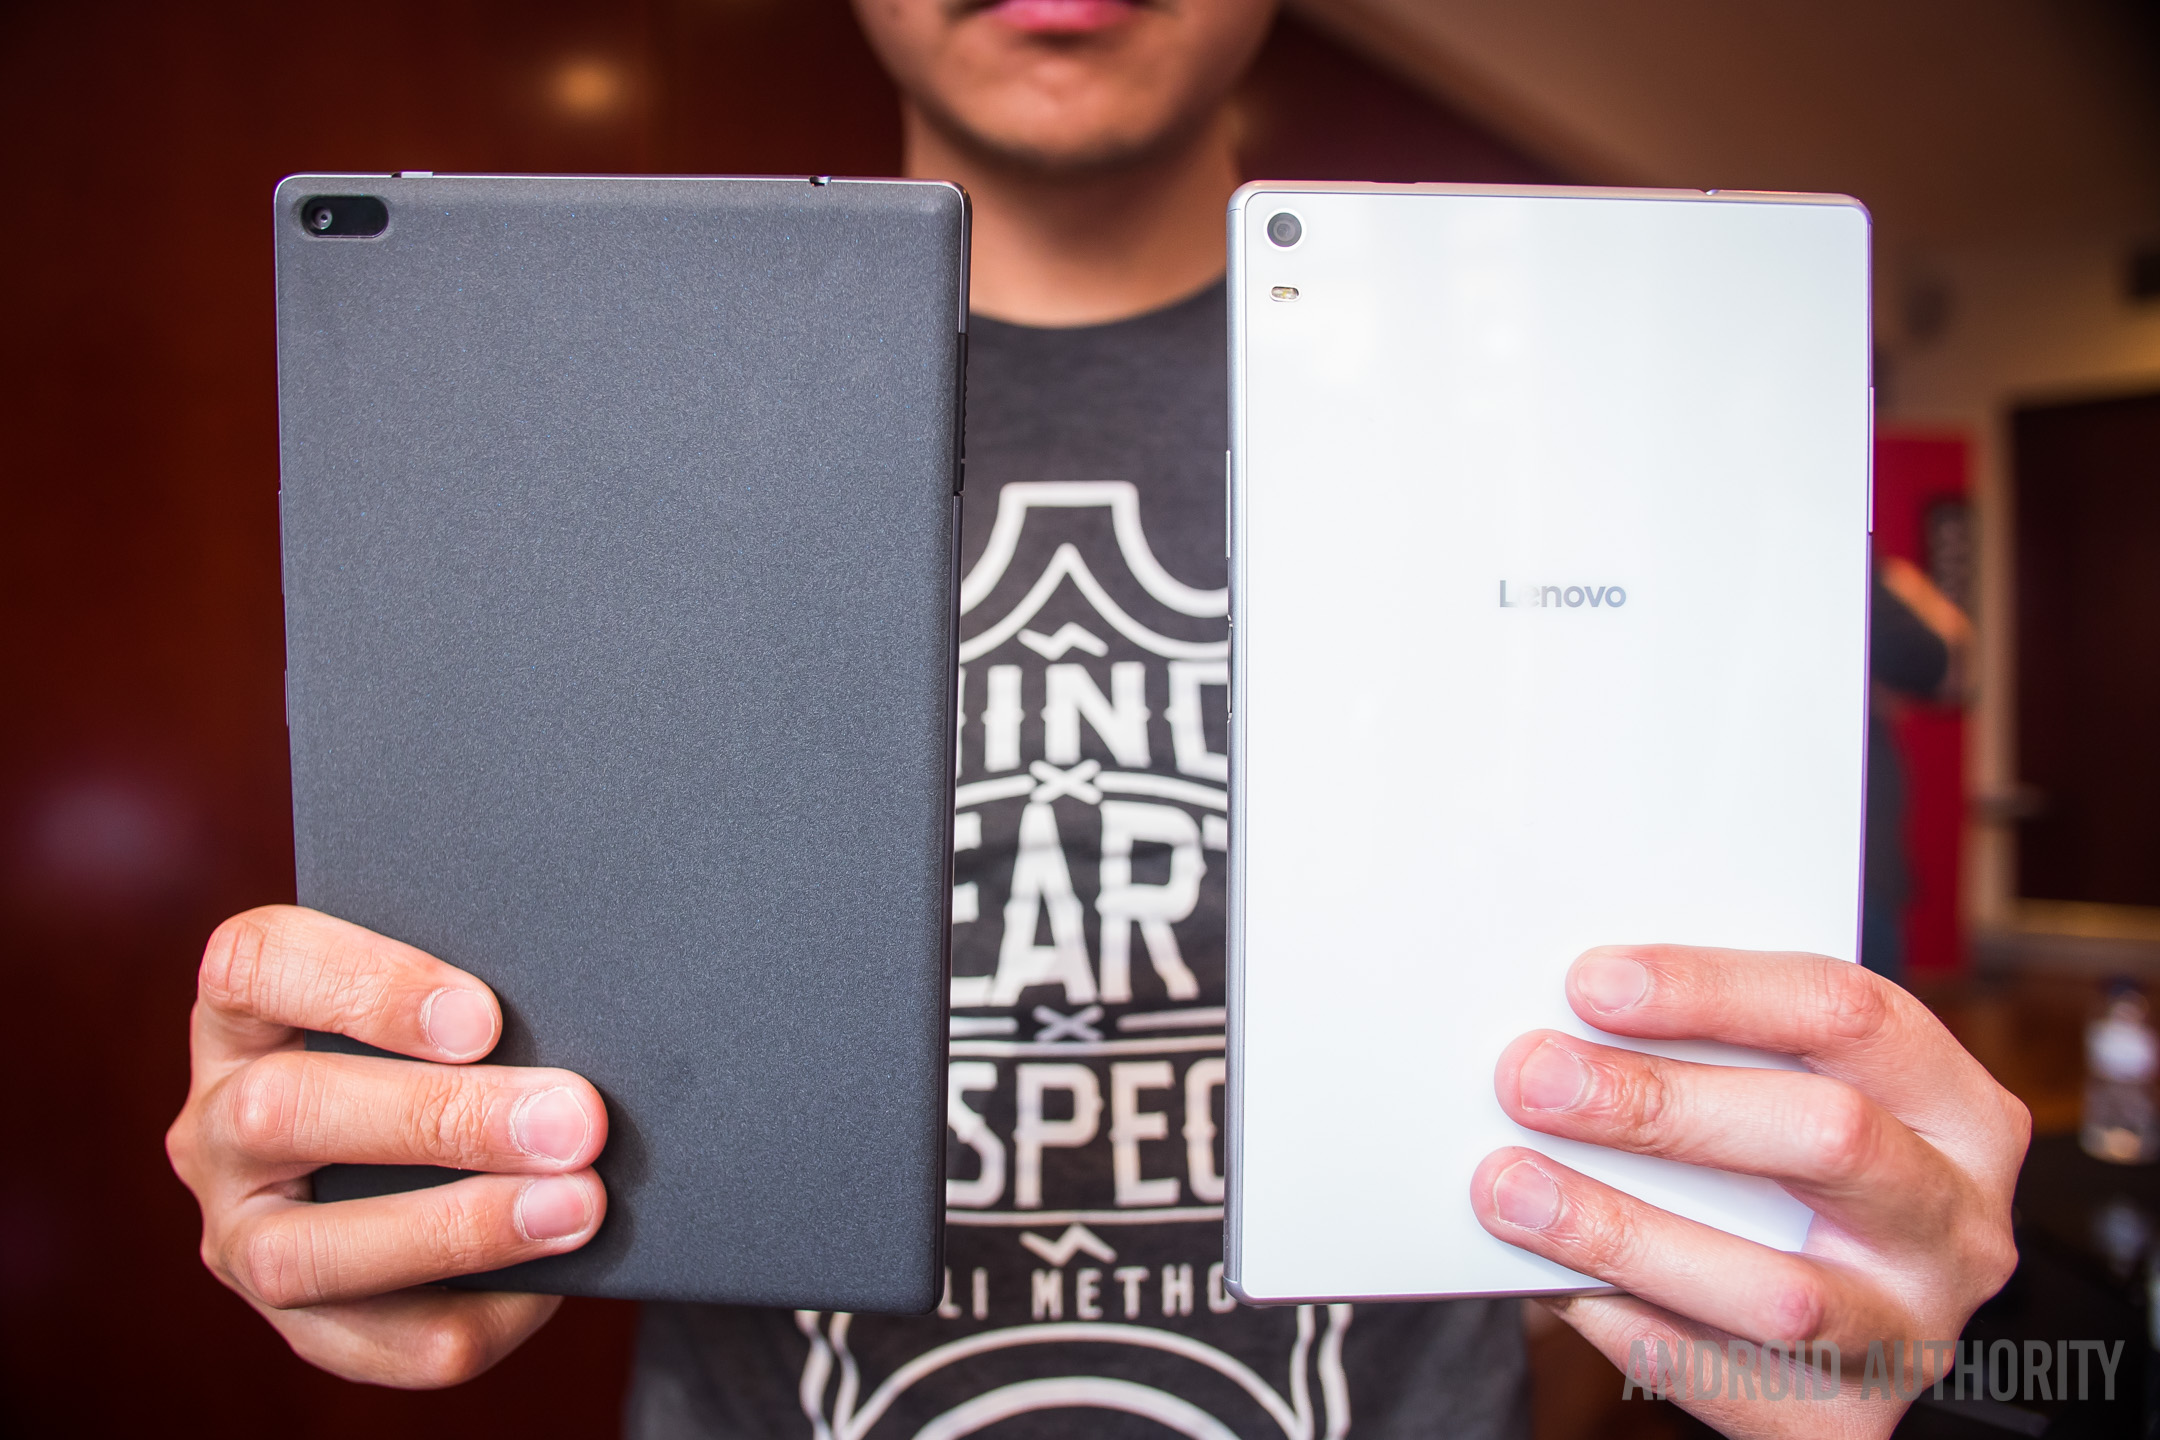 Hands-on: Lenovo's new Tab 4 Android tablets - Android Authority